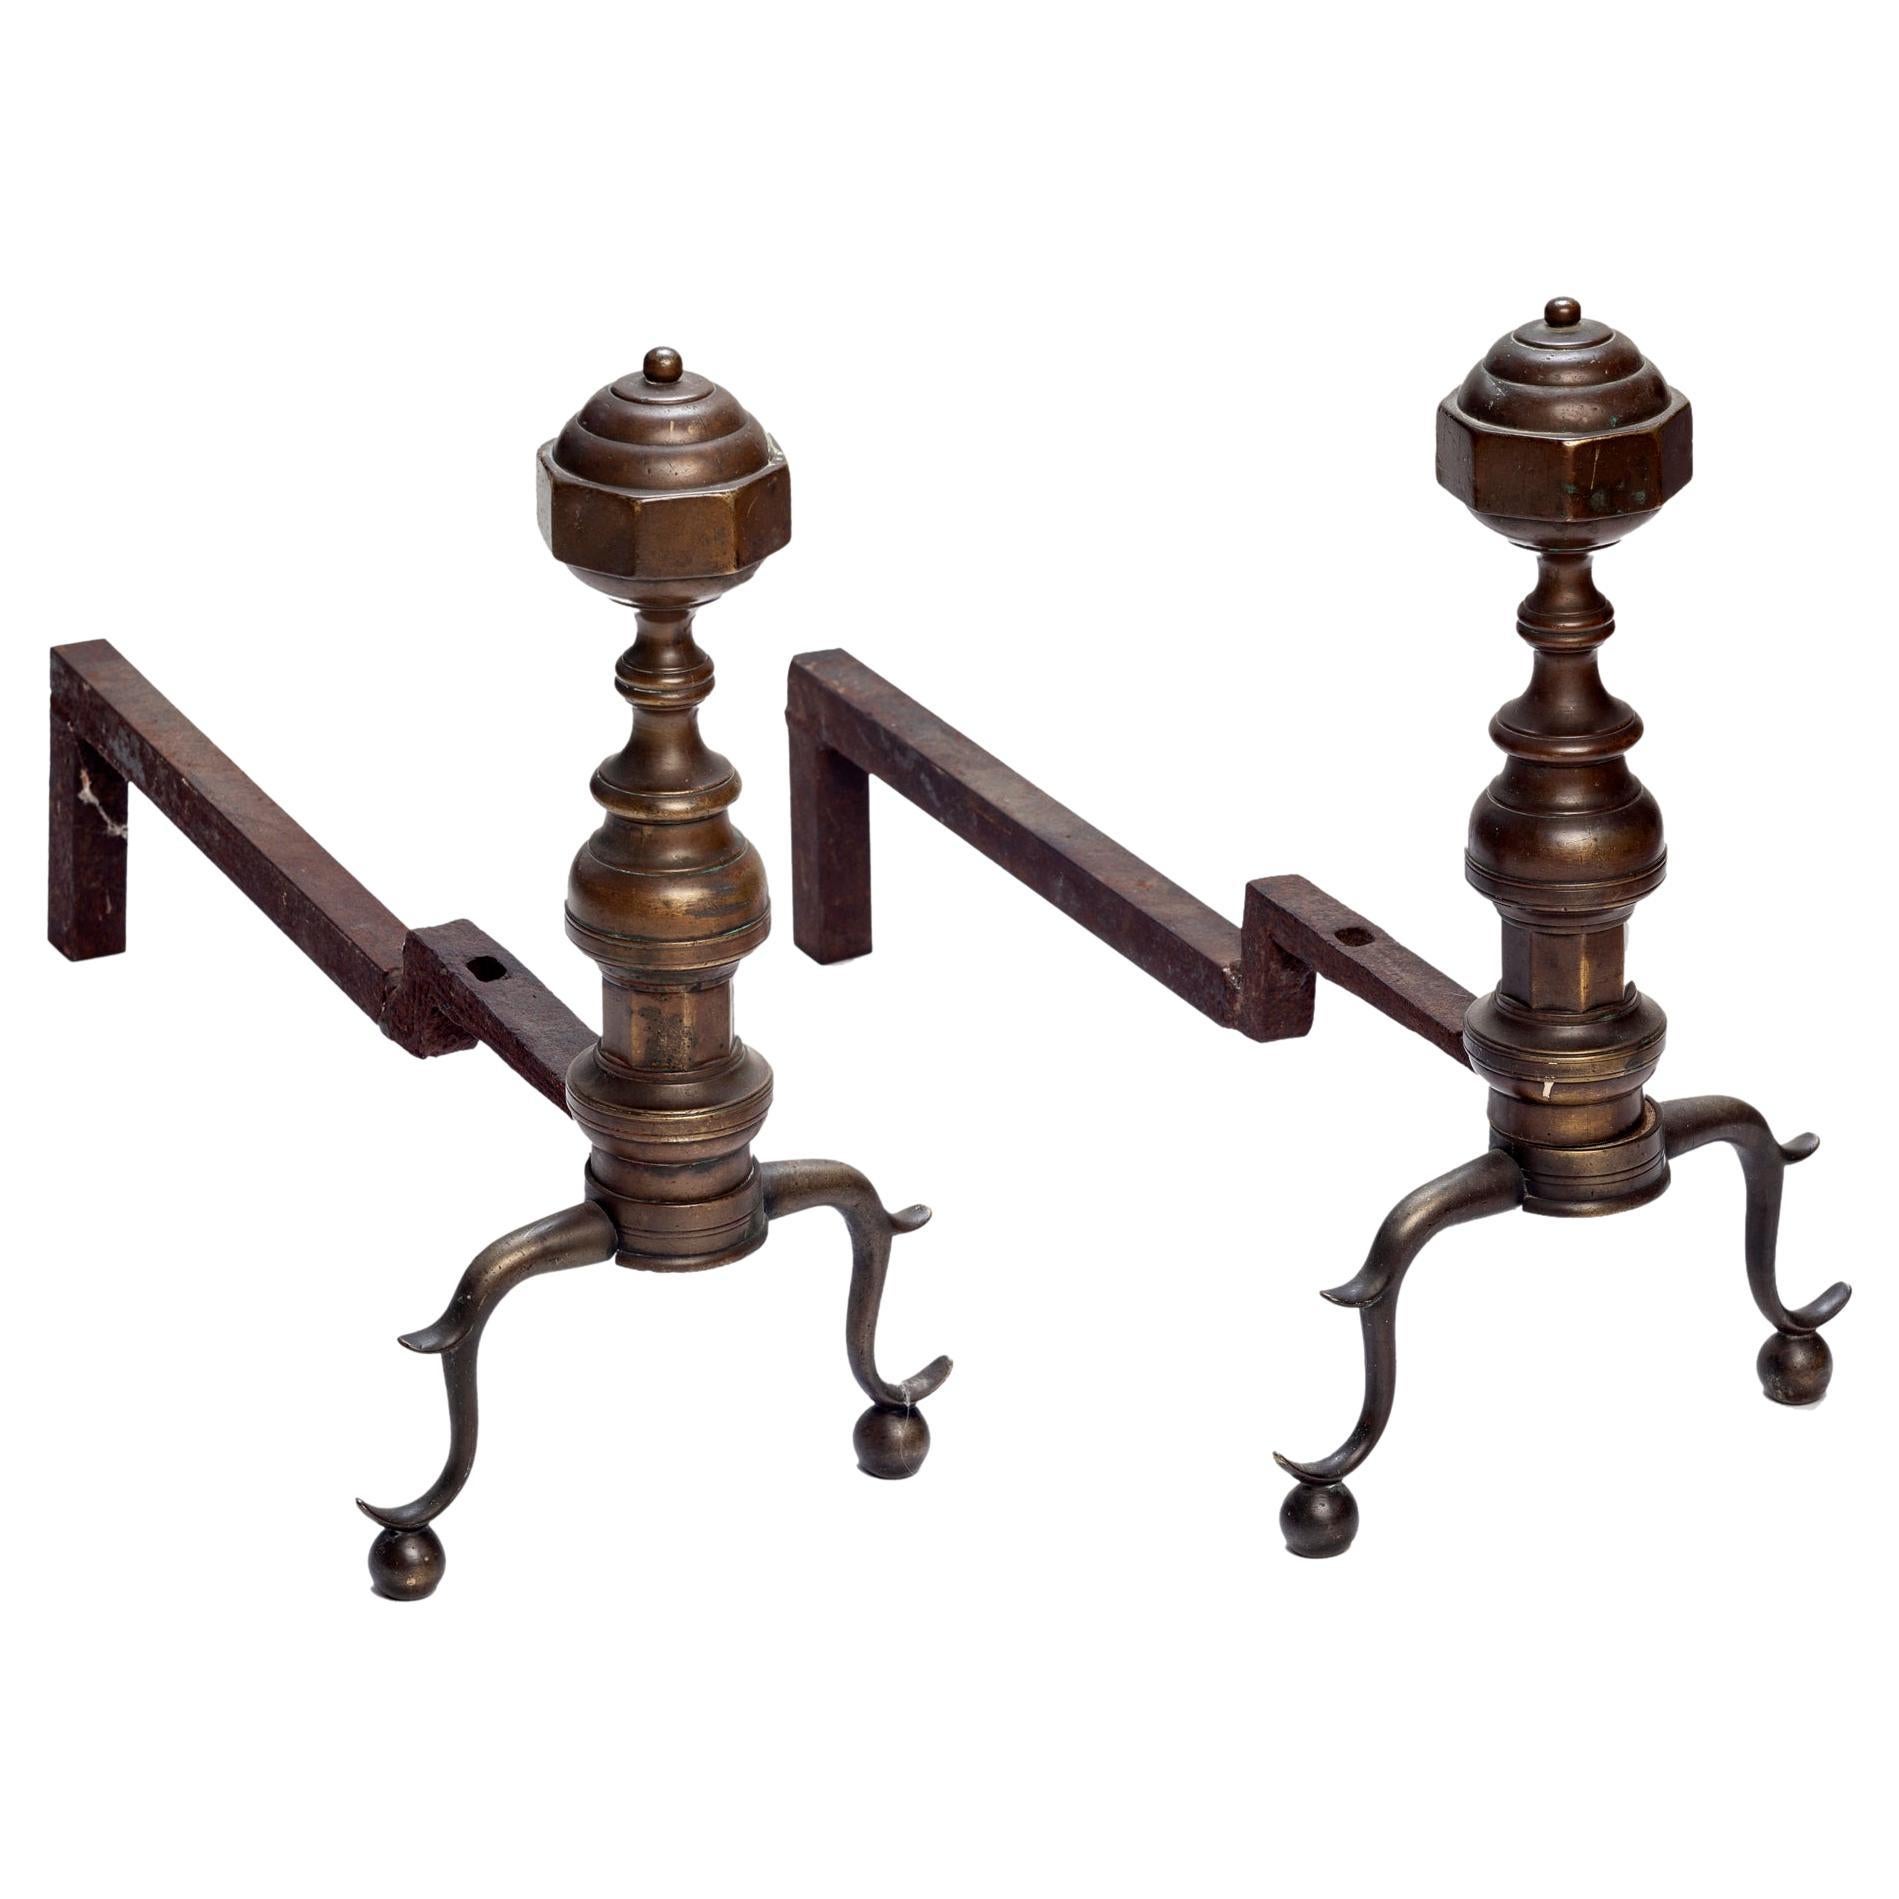 An impressive pair of large Arts and Crafts andirons, created with wrought iron with brass body & crowns.
Both are in very good condition, free of structural damage, or repairs. 